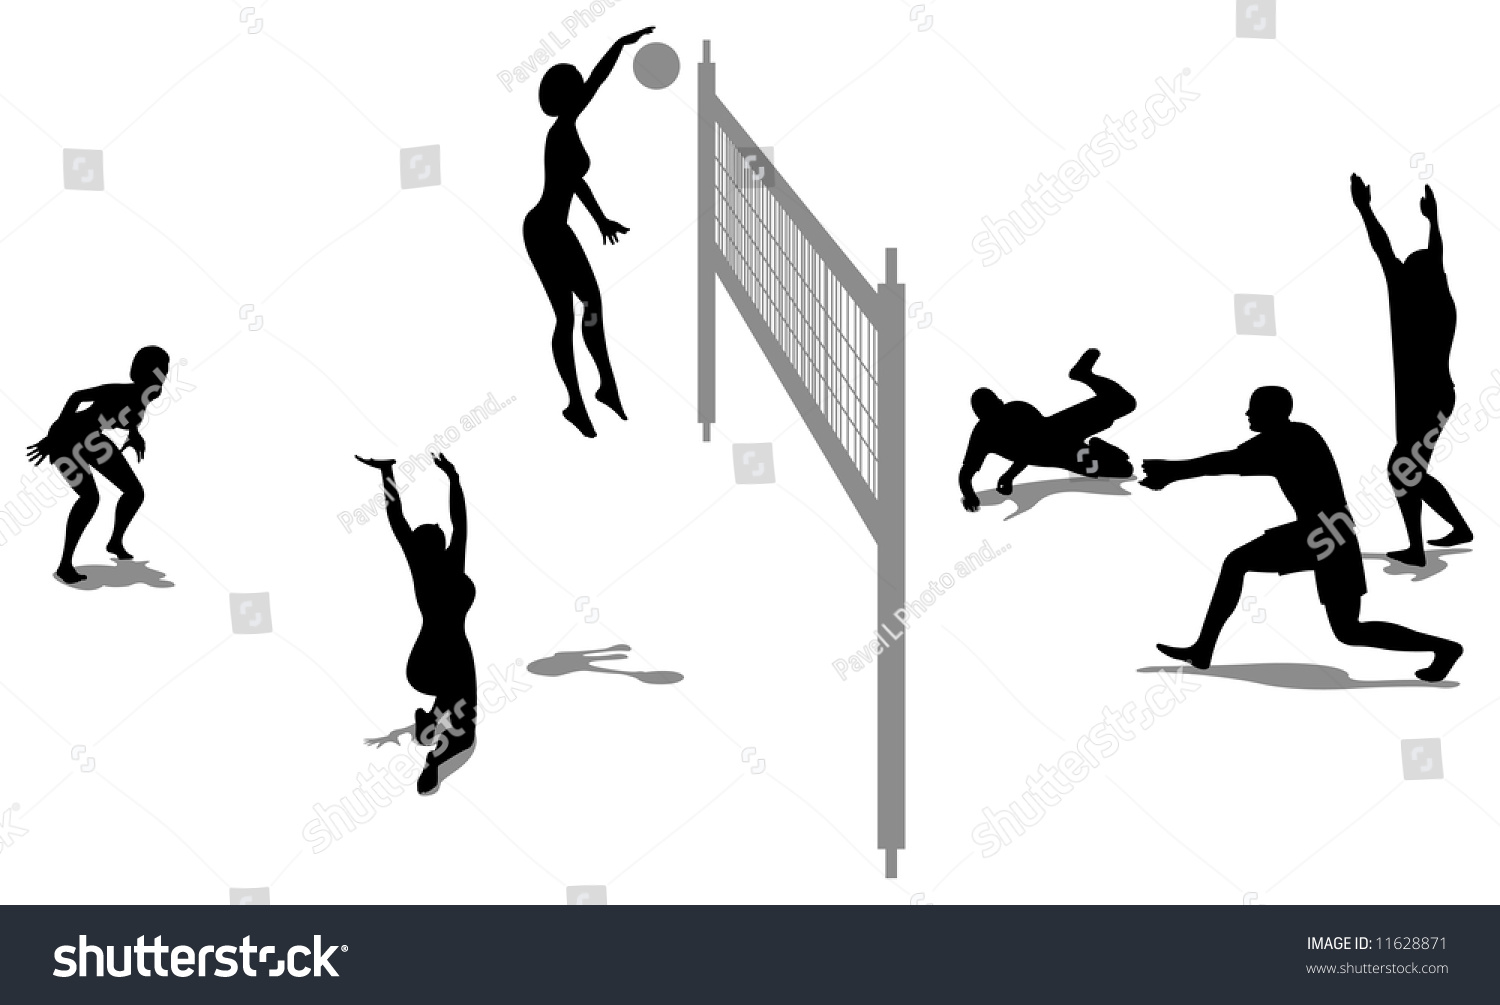 Volleyball Game Silhouette Vector - 11628871 : Shutterstock